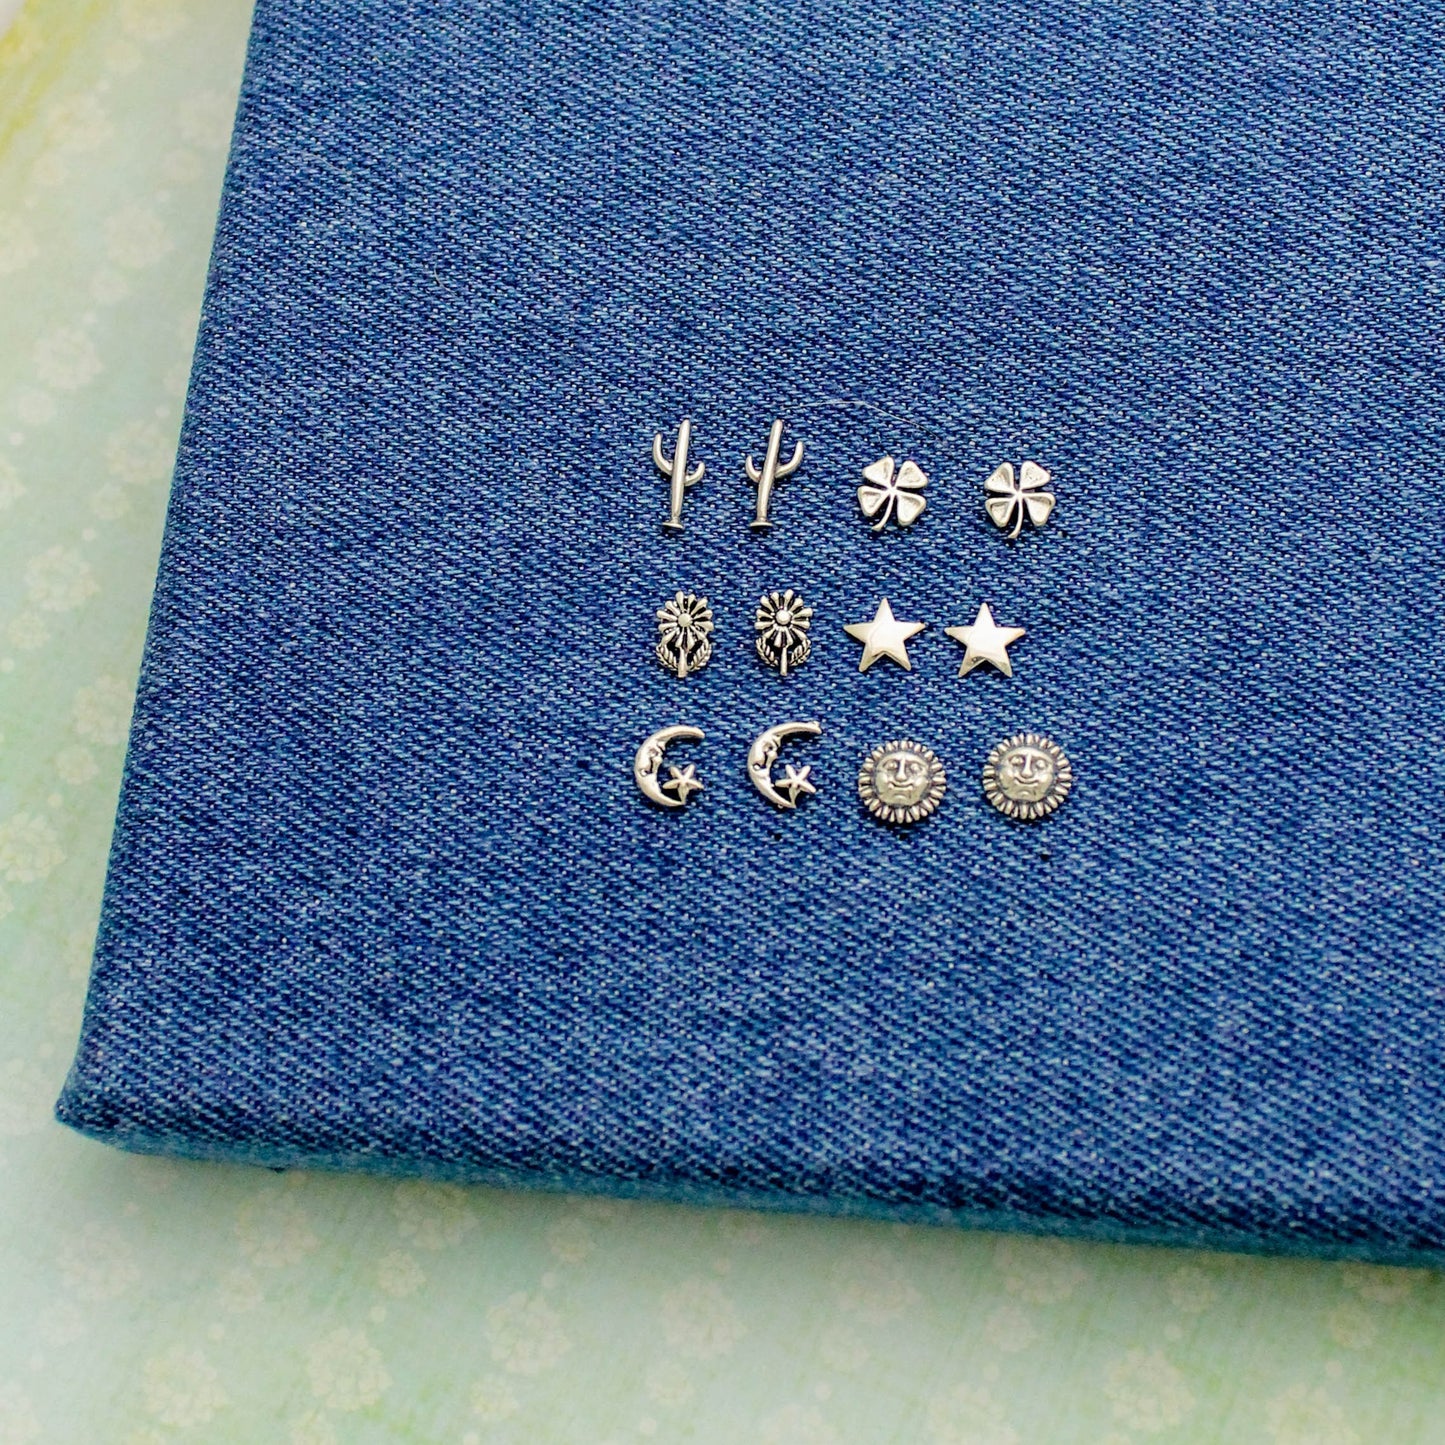 Flower and Celestial Studs in Sterling Silver, Sun, Moon with Stars, Stars, Daisies, Clovers, & Cactus, Silver Stud Earrings, Gift for Her